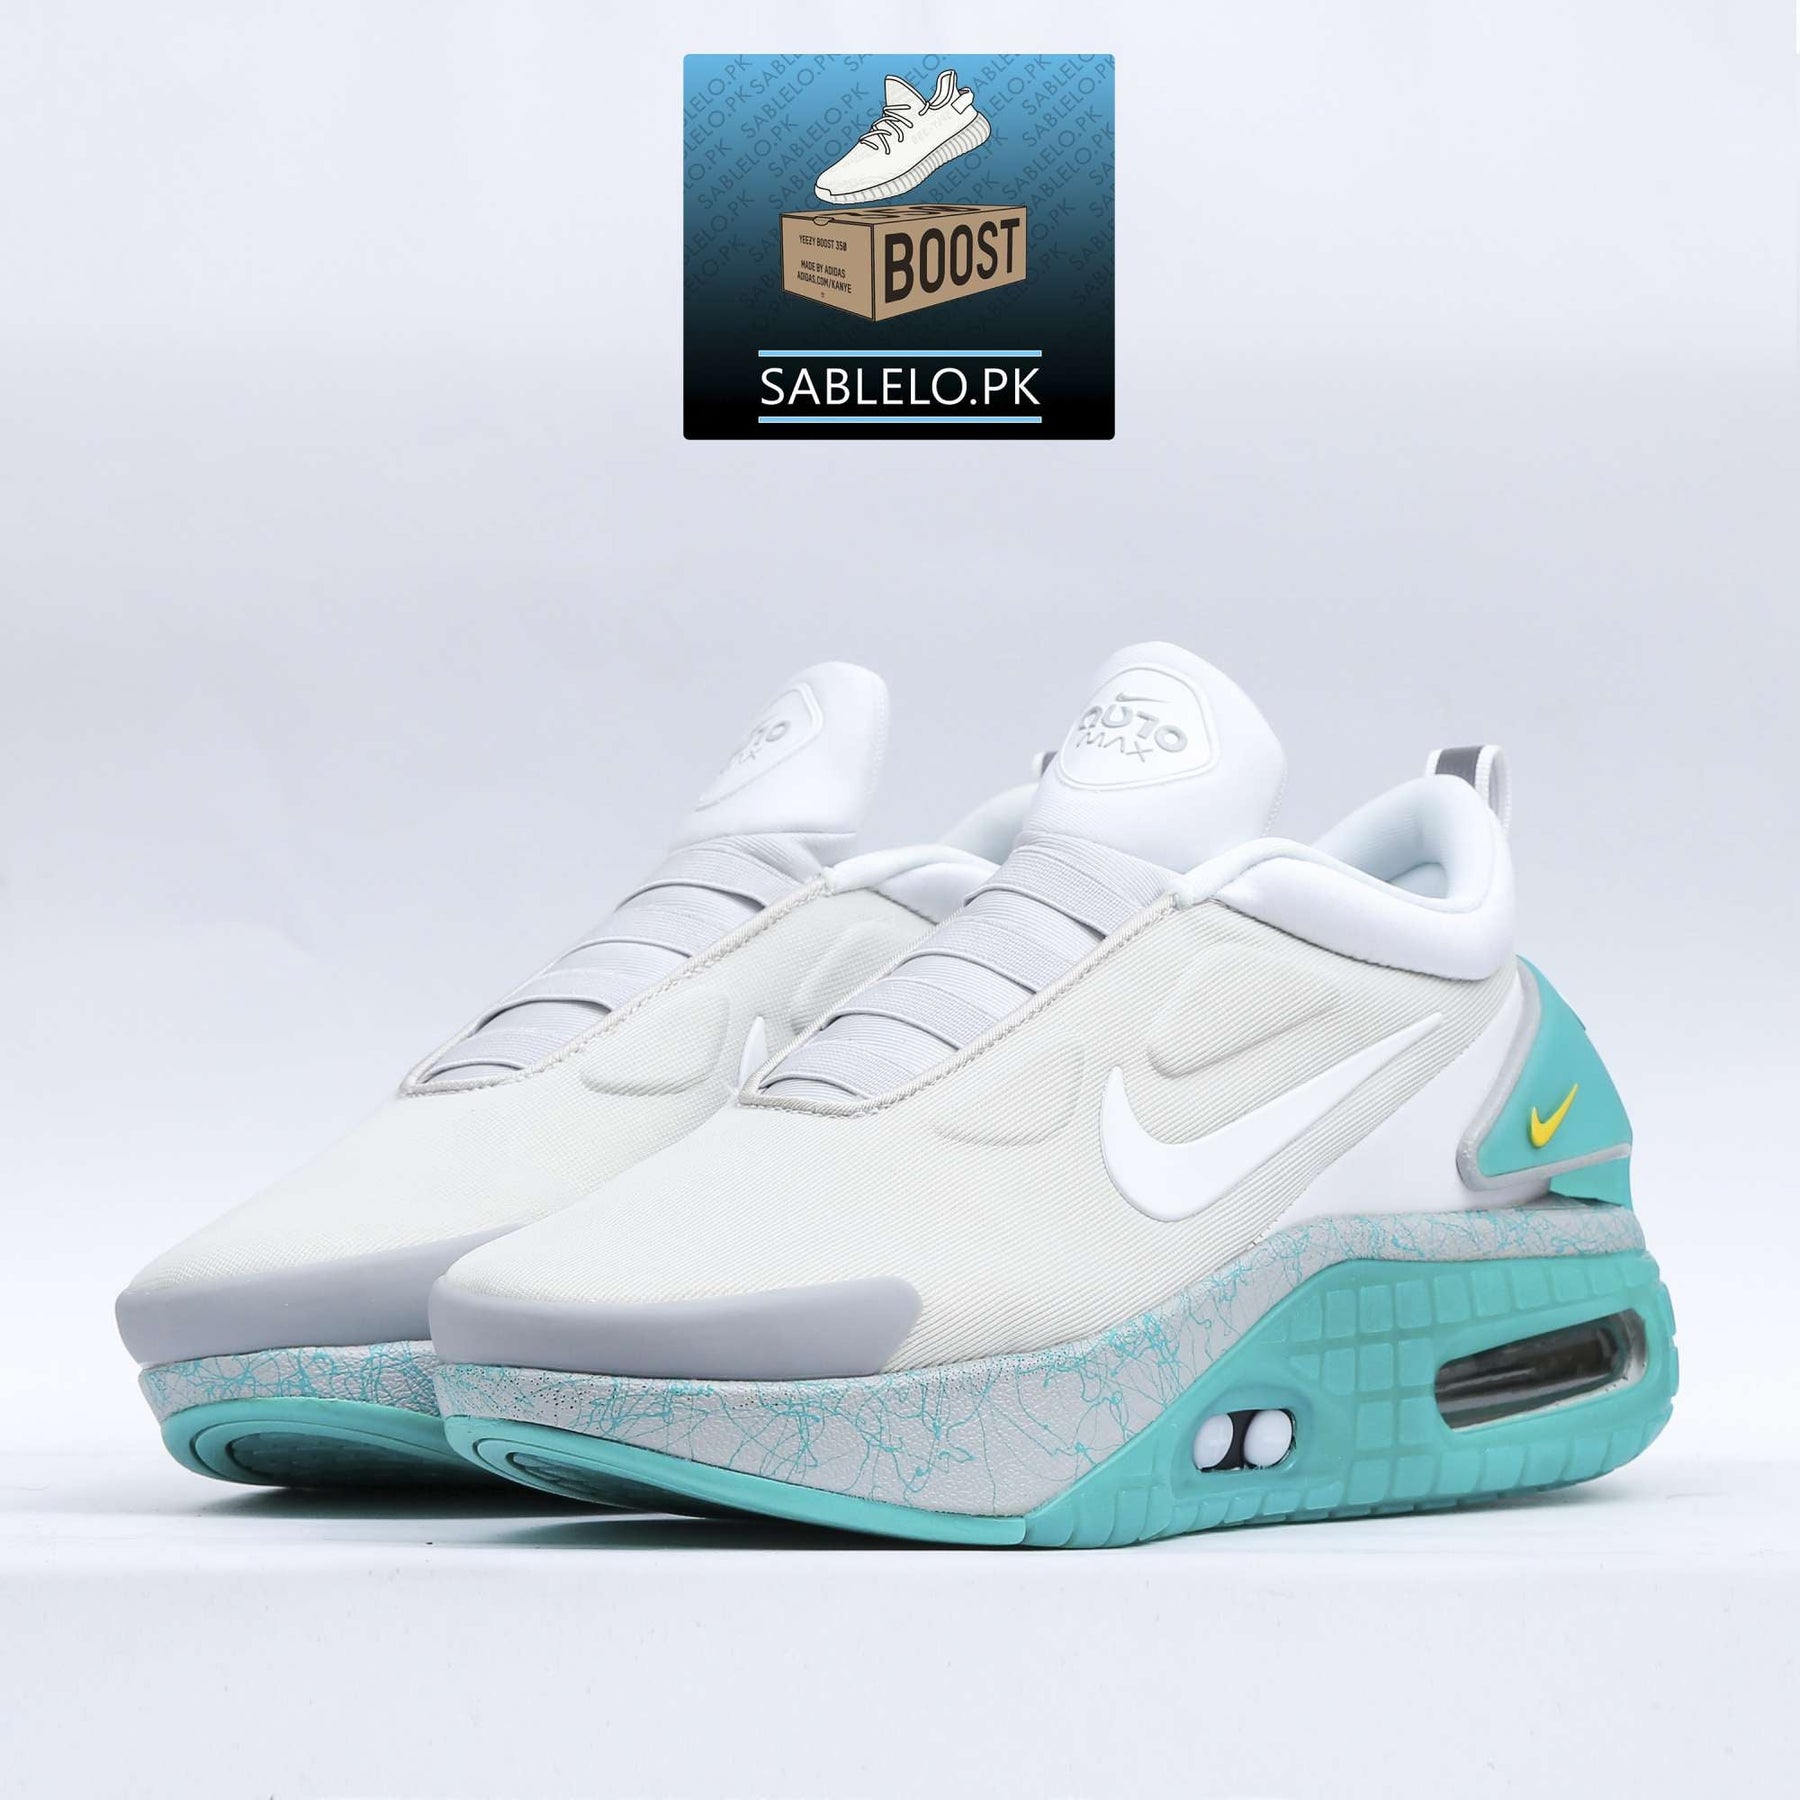 Nike Adobt Auto Max Peakok - Premium Shoes from perfectshop - Just Rs.8999! Shop now at Sablelo.pk